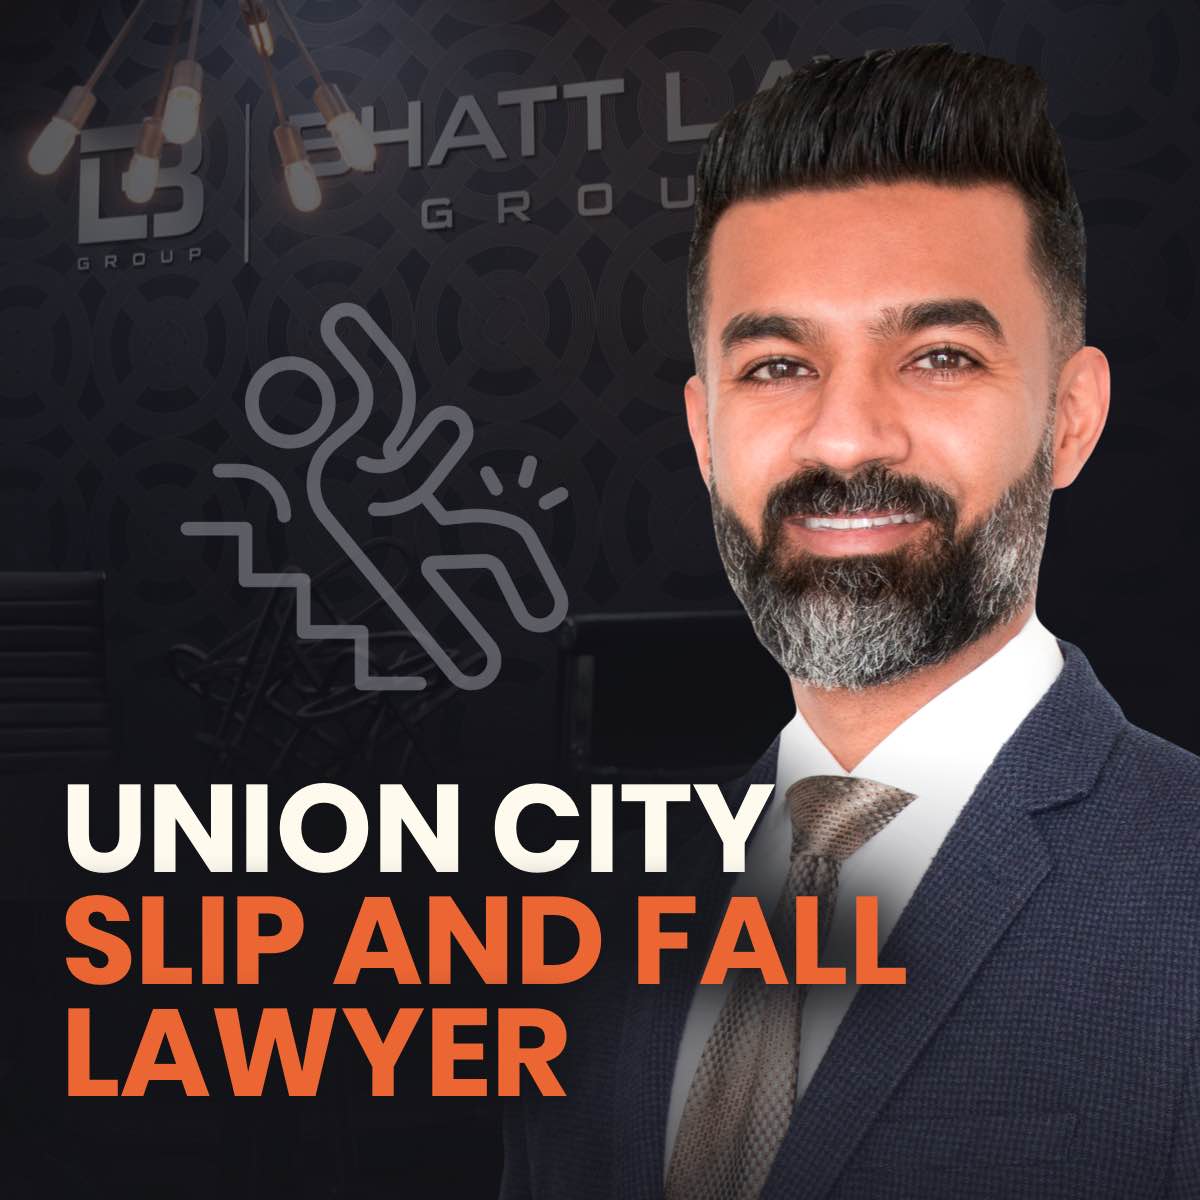 Union City Slip and Fall Lawyer